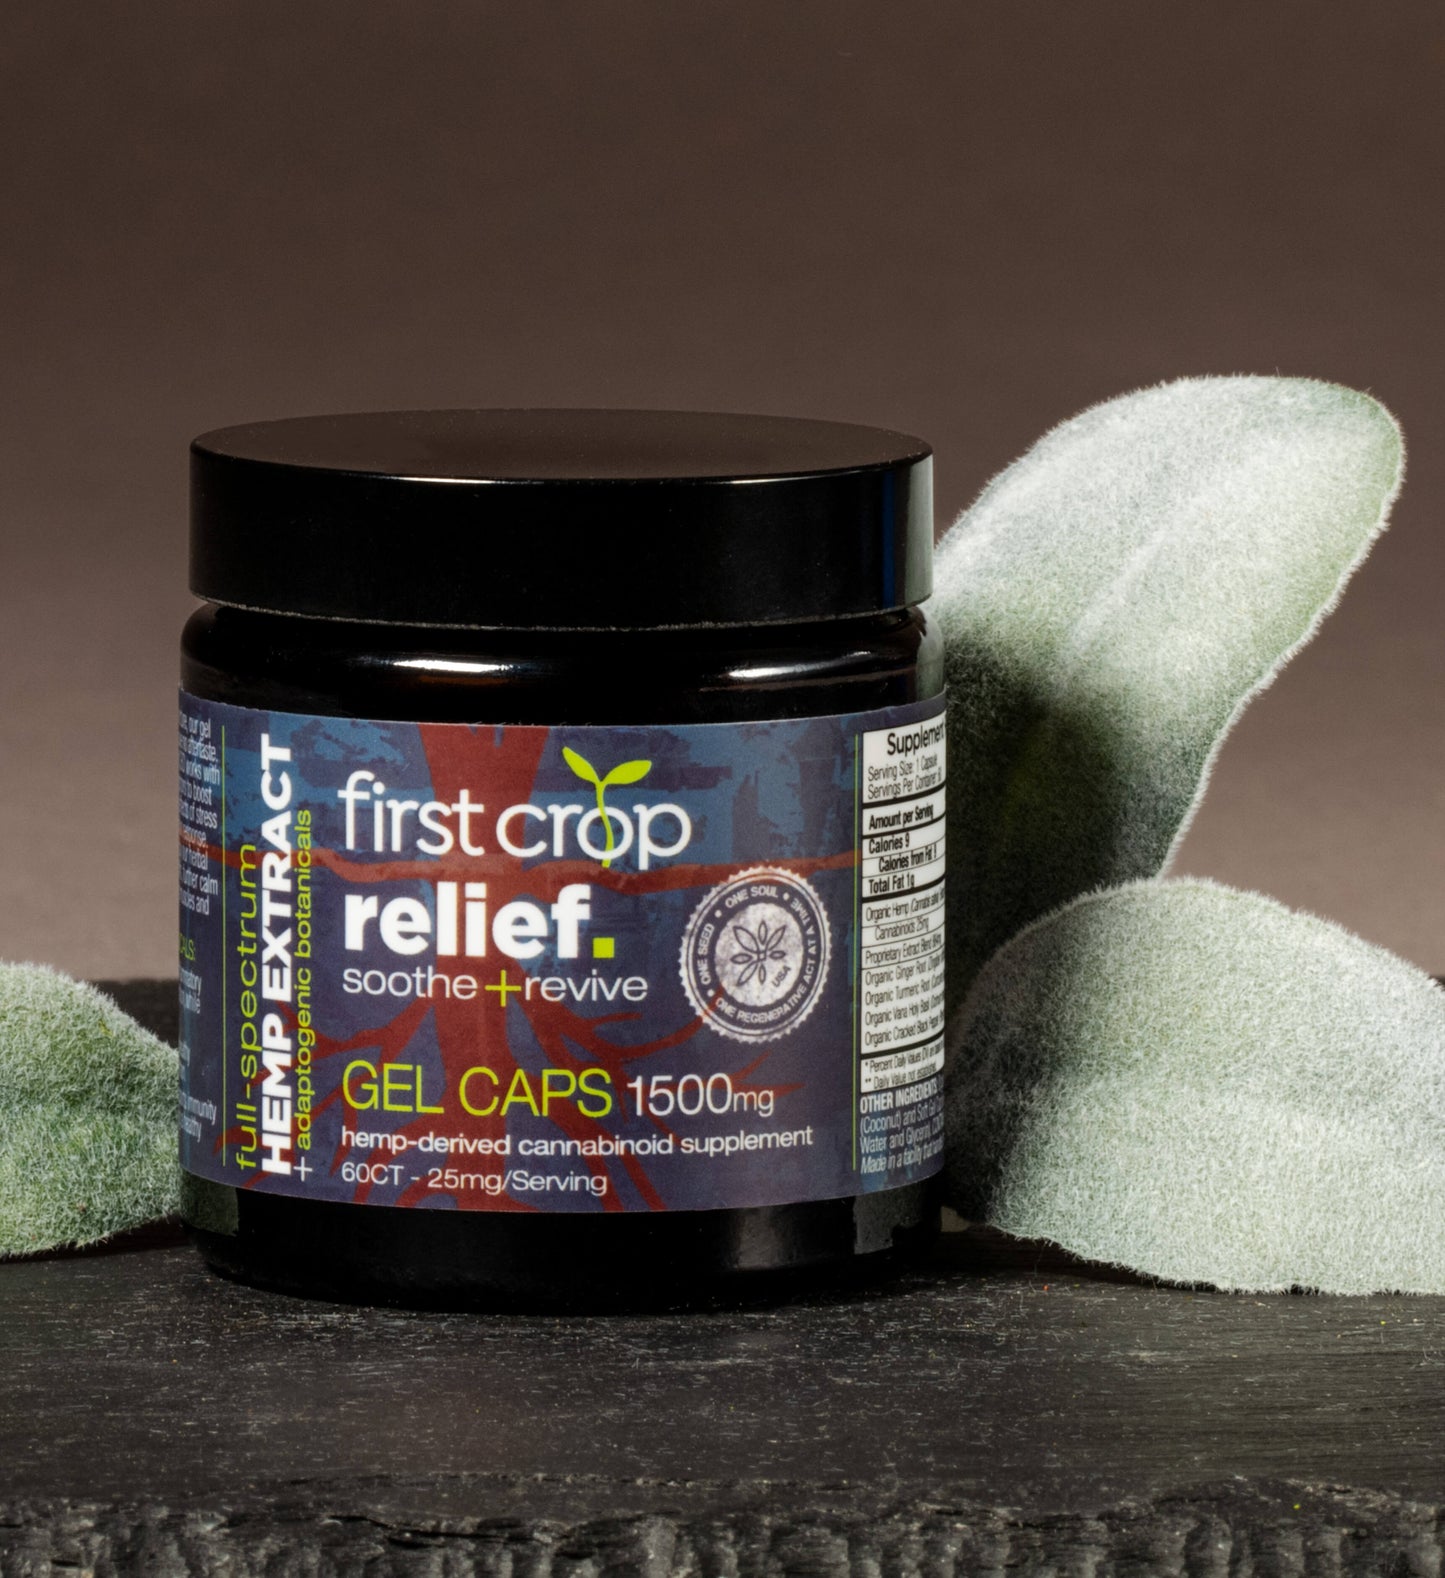 First Crop Full Spectrum Capsules - 1500mg (a Capsules) made by First Crop sold at CBD Emporium